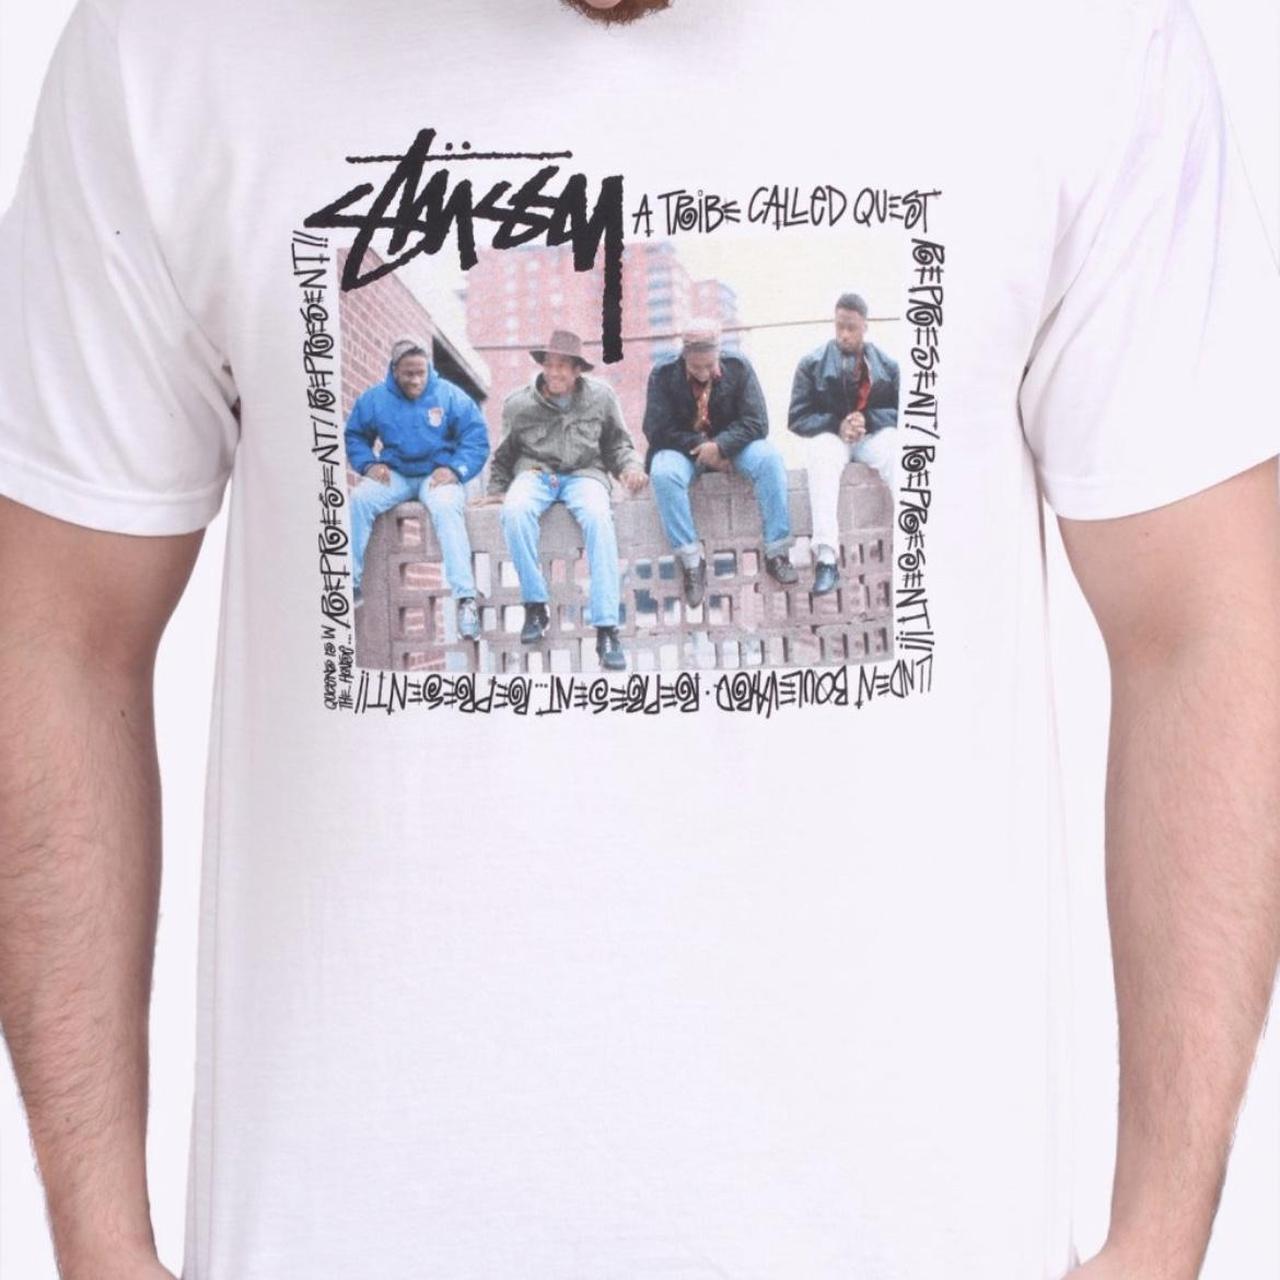 Stussy x A Tribe Called Quest t shirt, Extremely rare